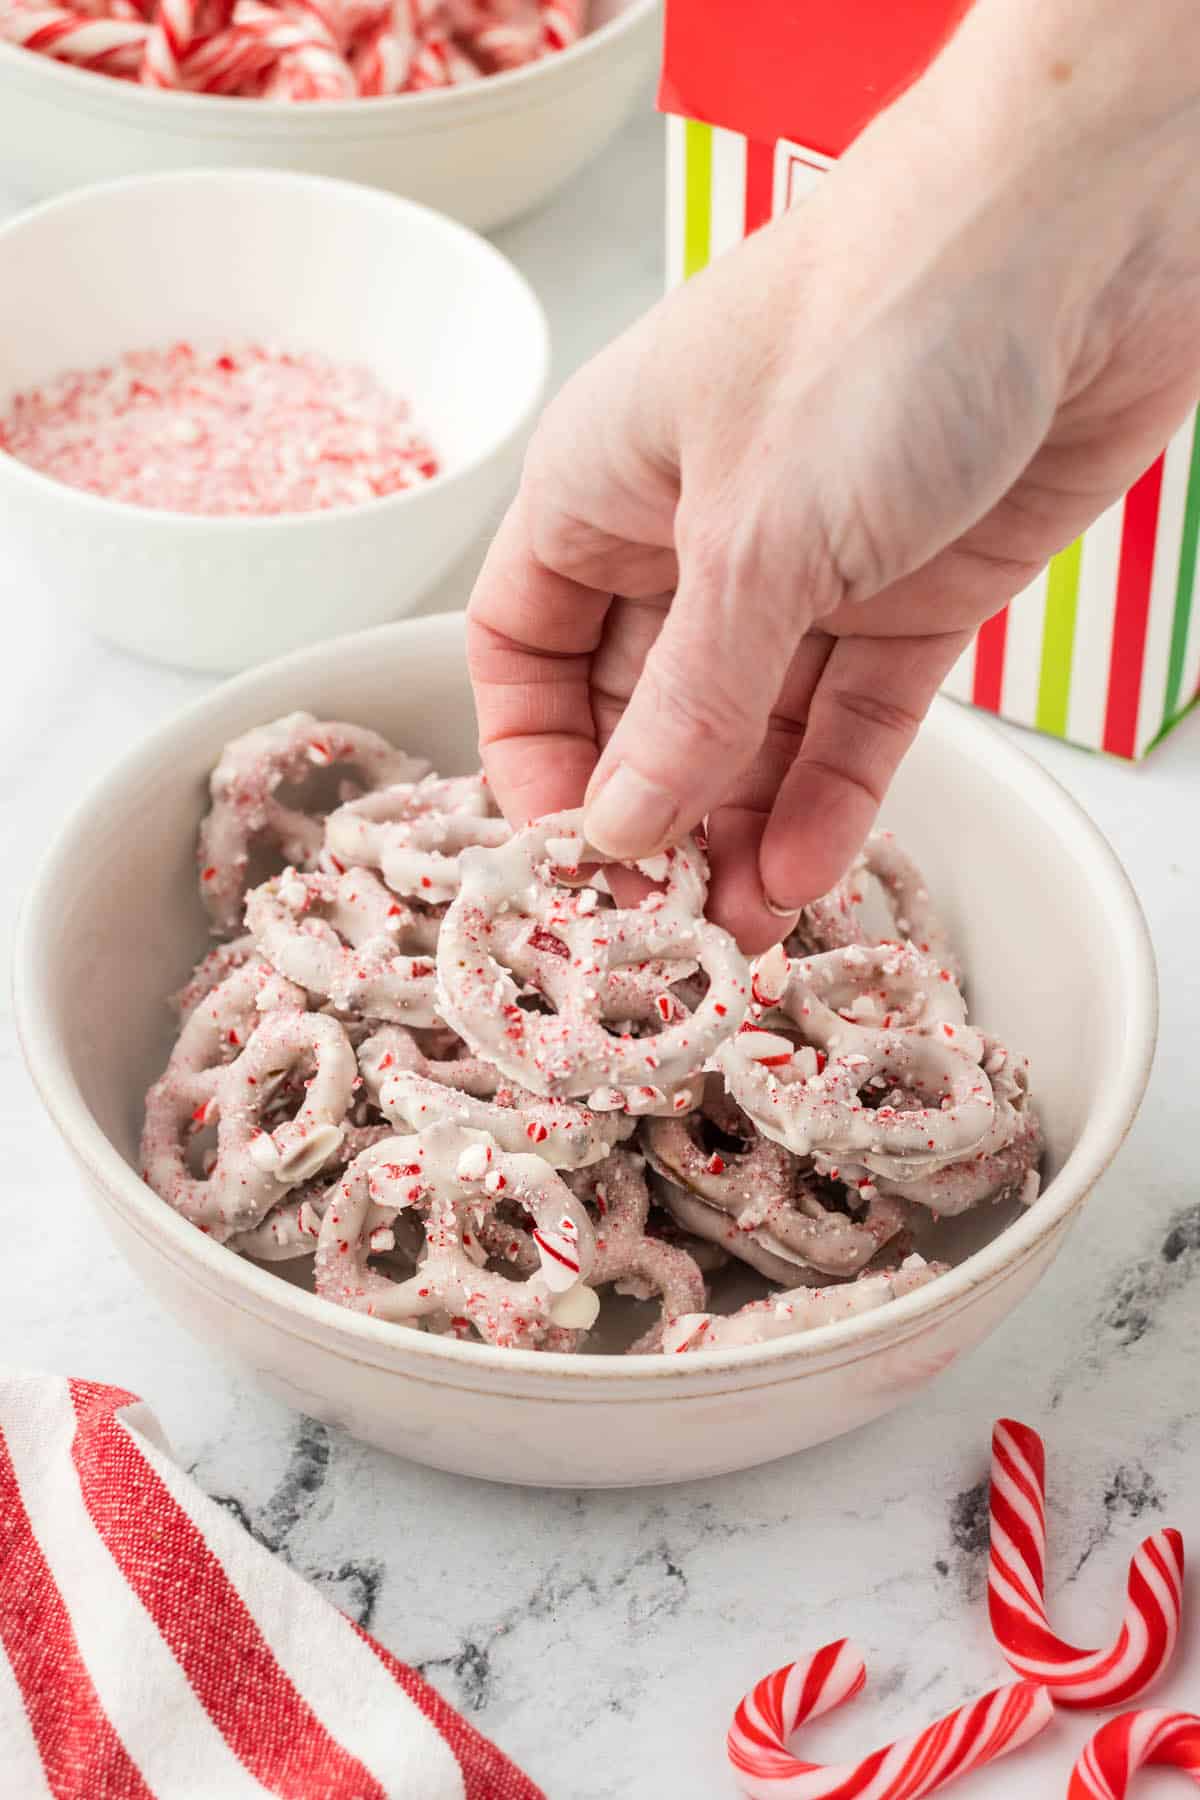 Bowl filled with chocolate-covered pretzels topped with crushed candy canes.